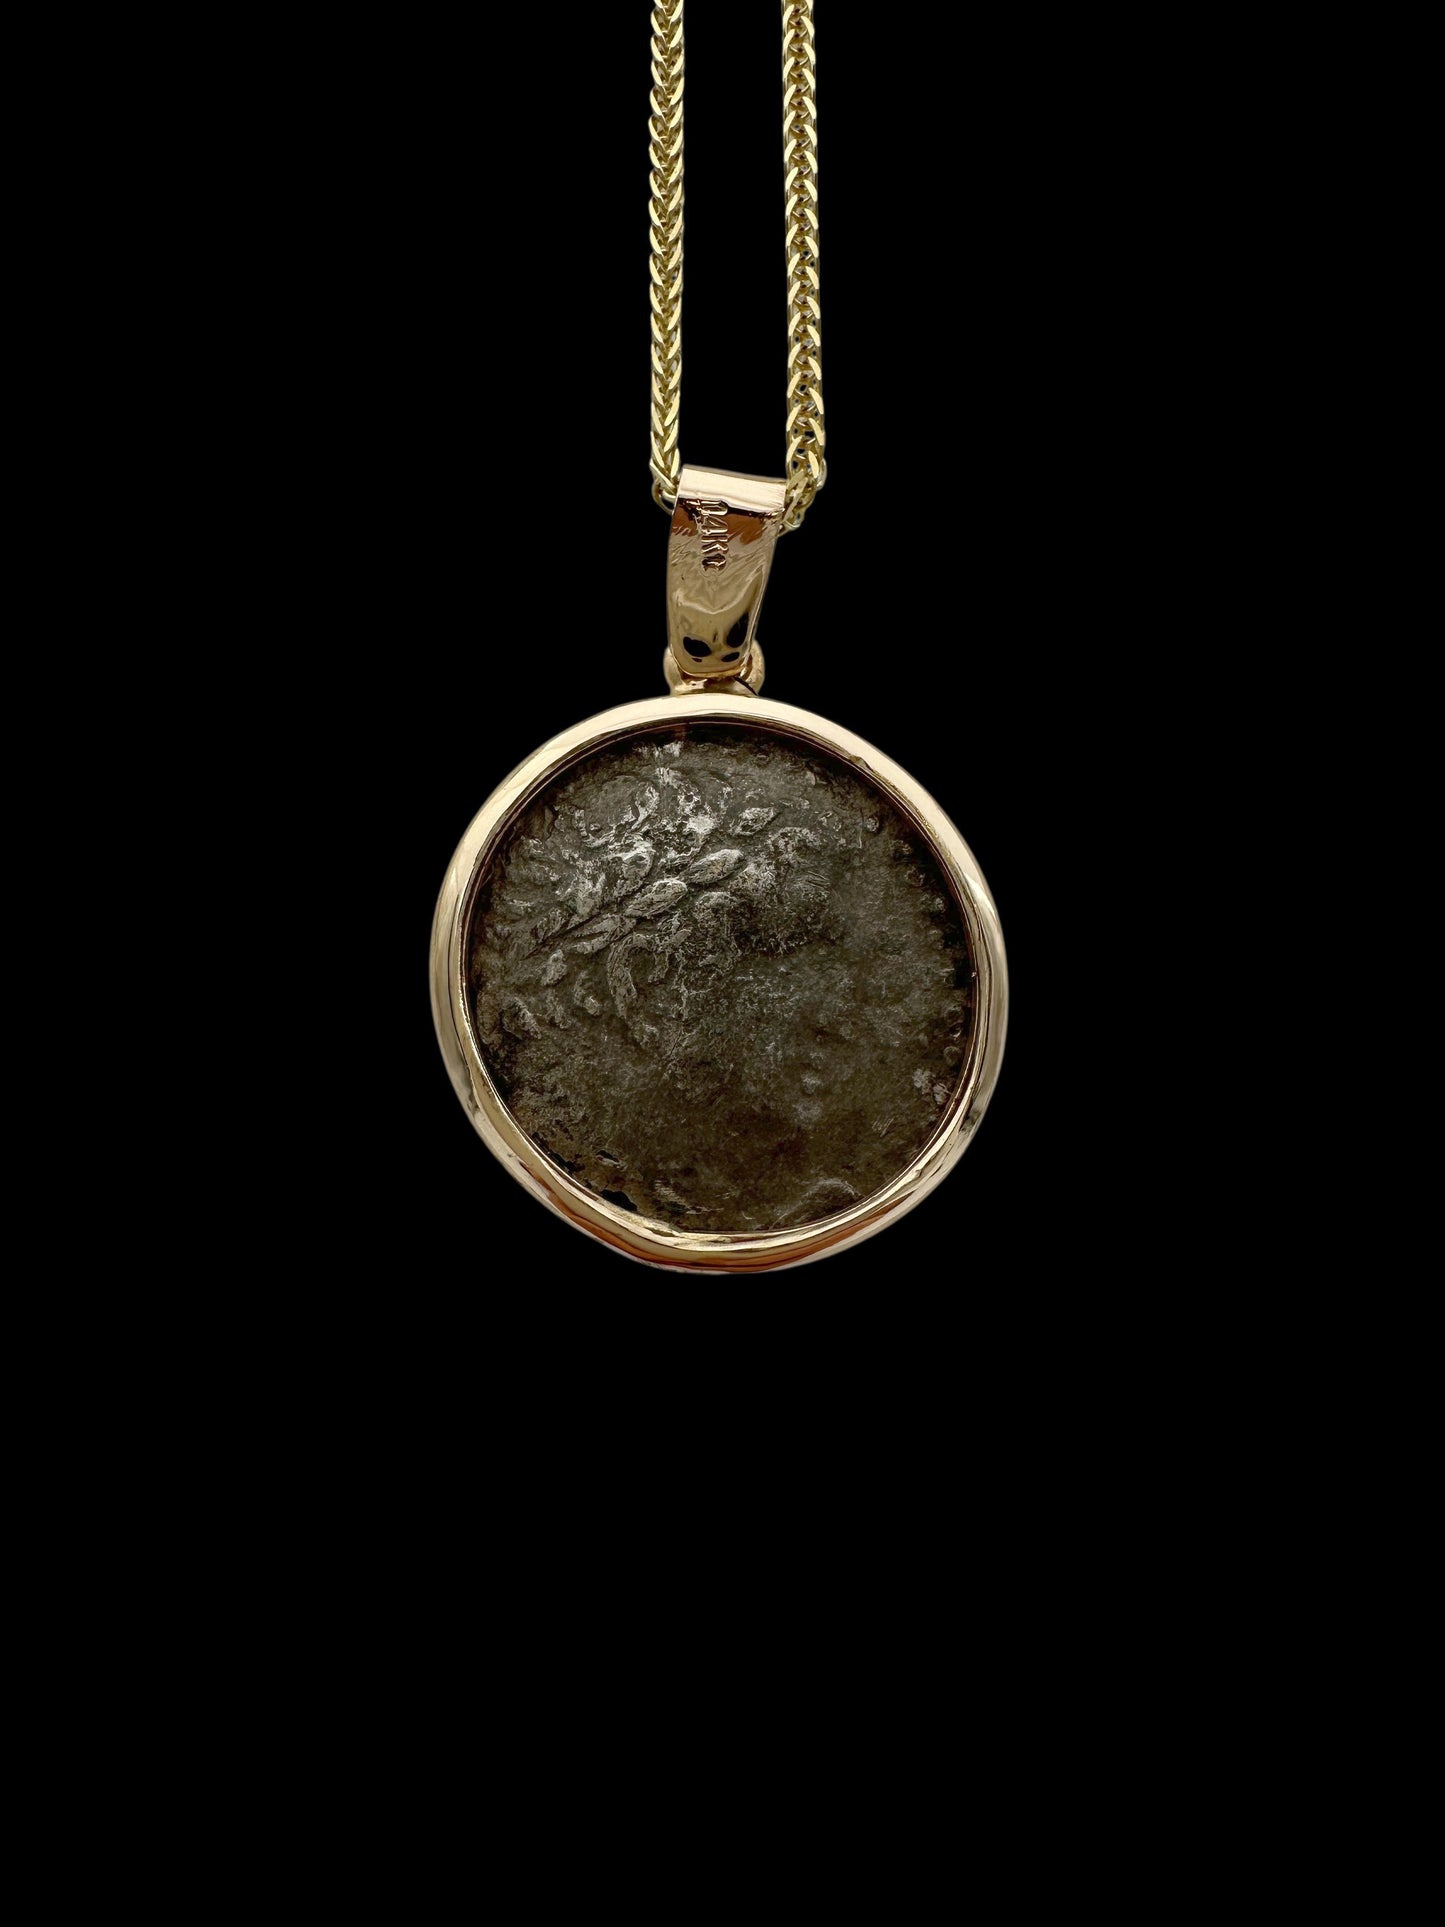 Ancient Tyrian Shekel Temple Tax Coin Set in 14K Gold Pendant